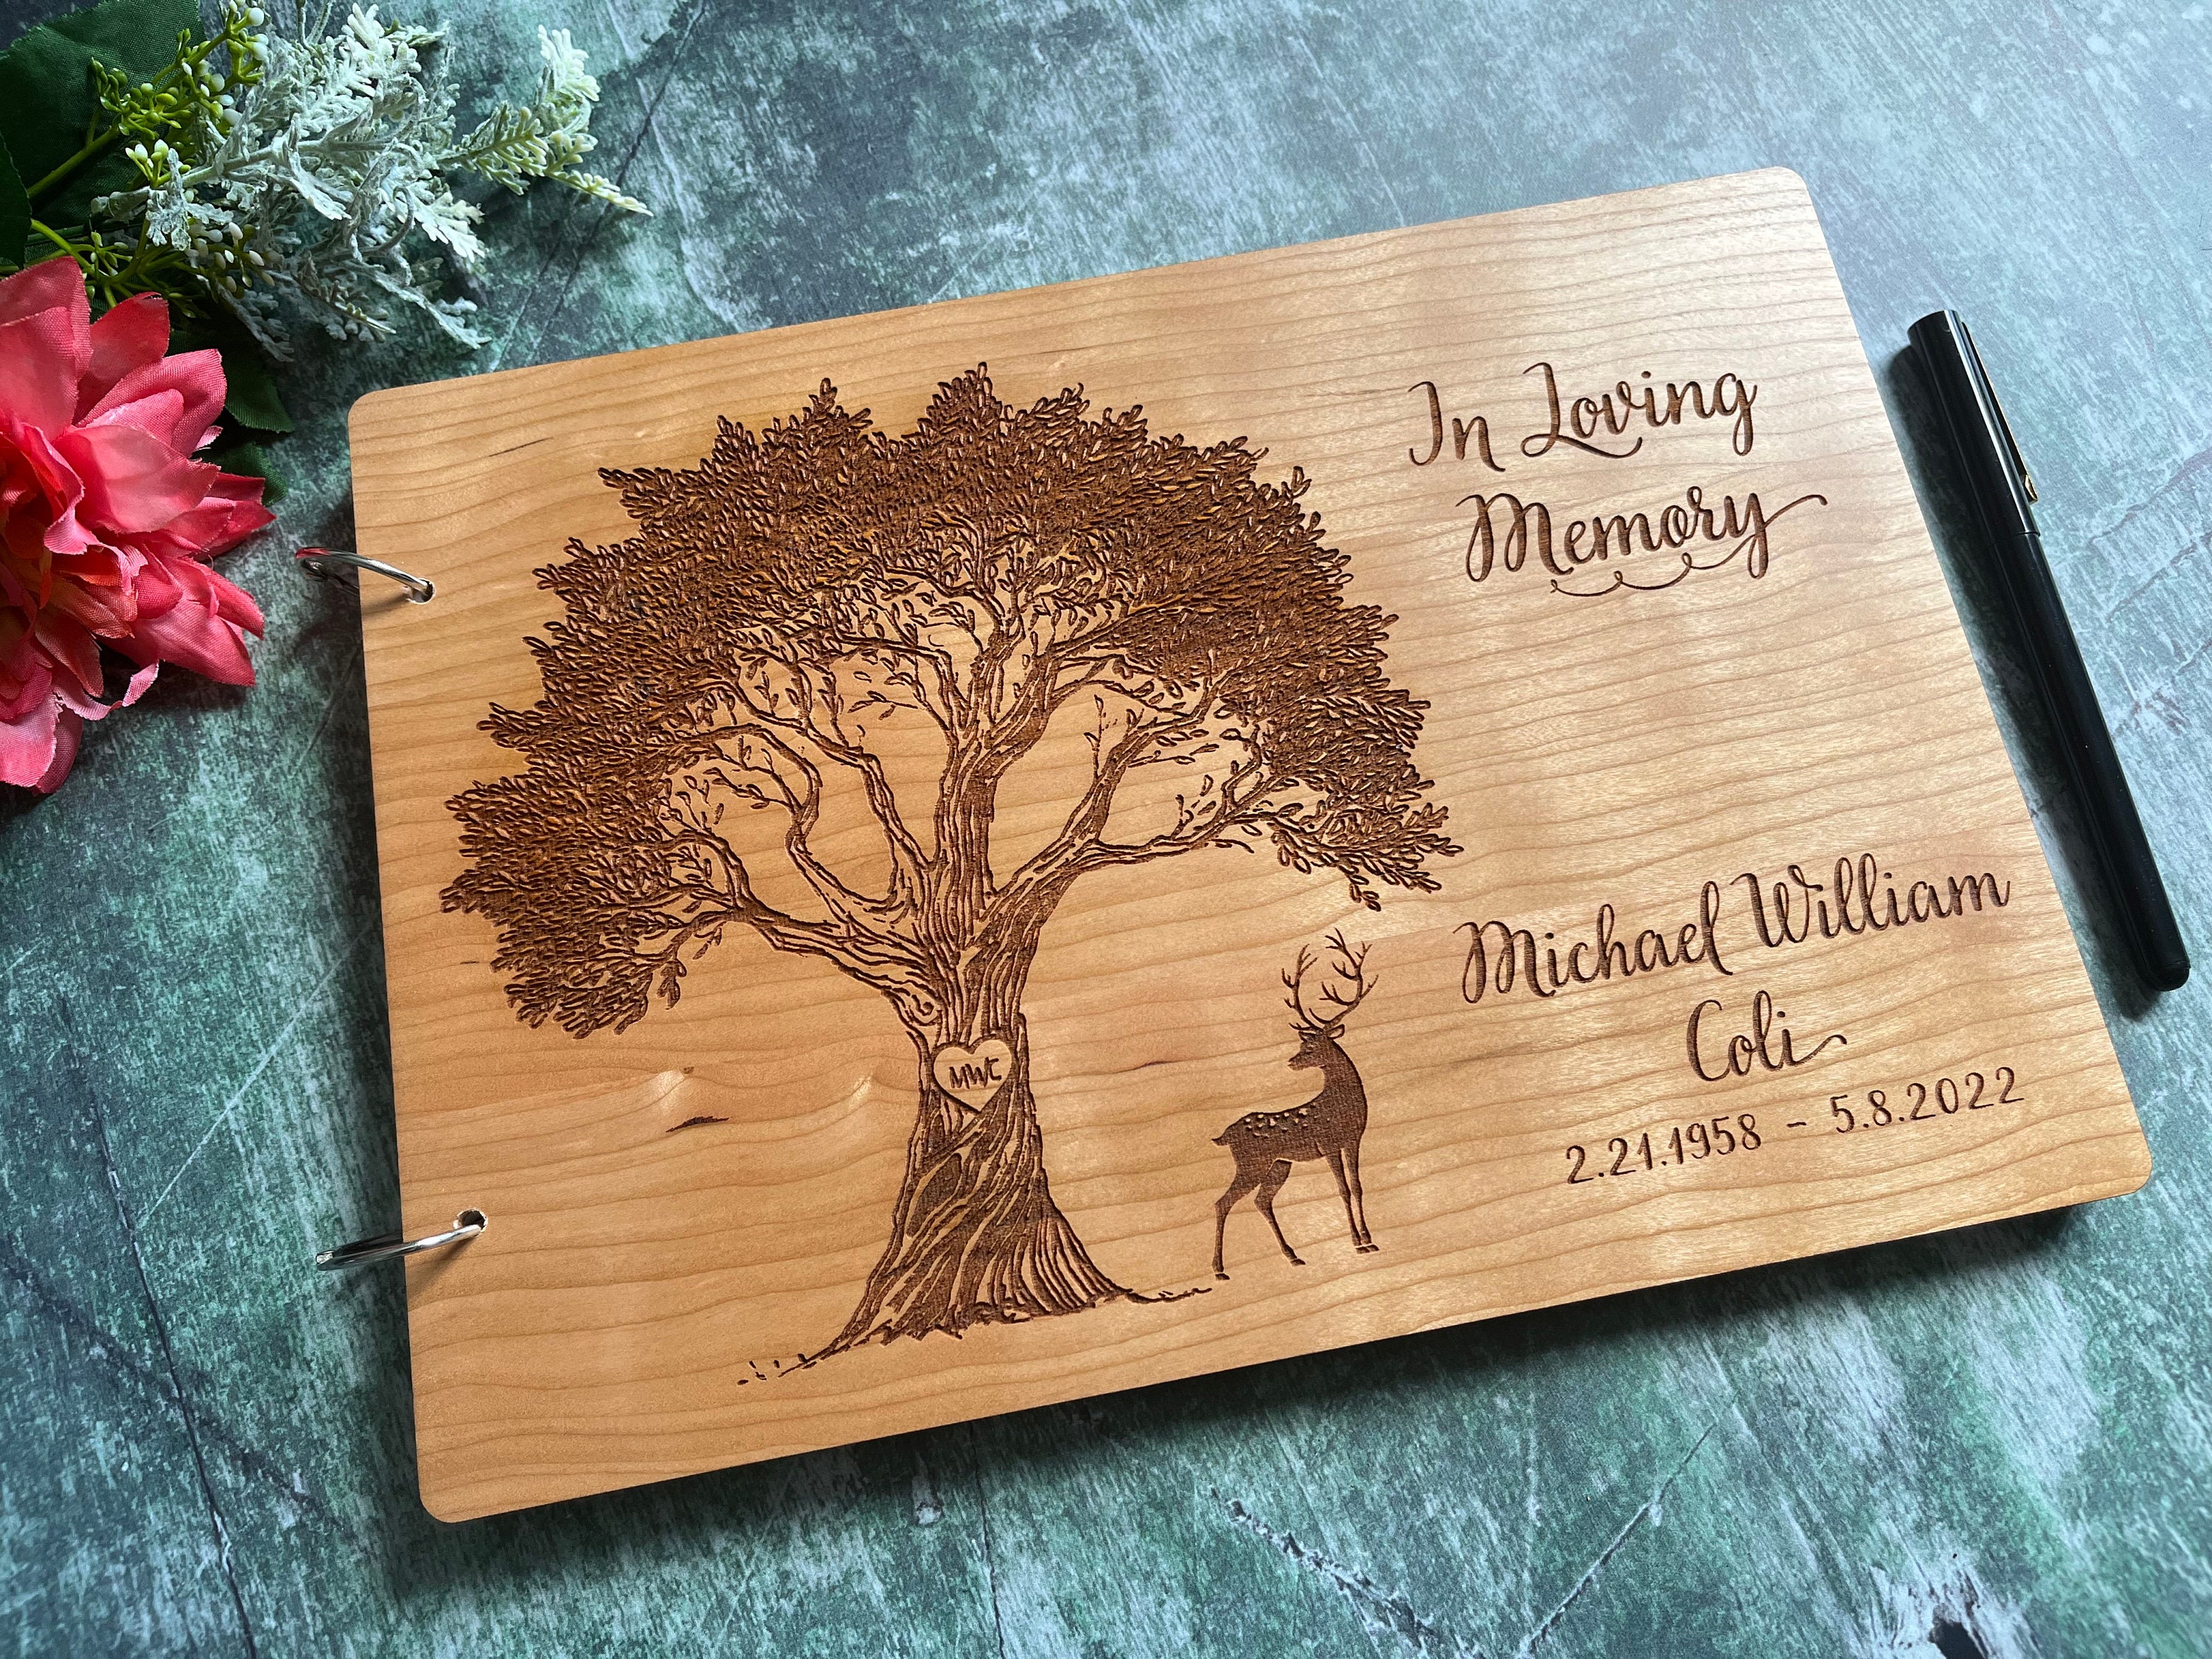  Designed Funeral Guest Book, Funeral Guest Book for Memorial  Service with Pen and Acrylic Stand, Celebration of Life Guest Book Set  Included A Double Side Matched Table Sign & Adhesive Photo